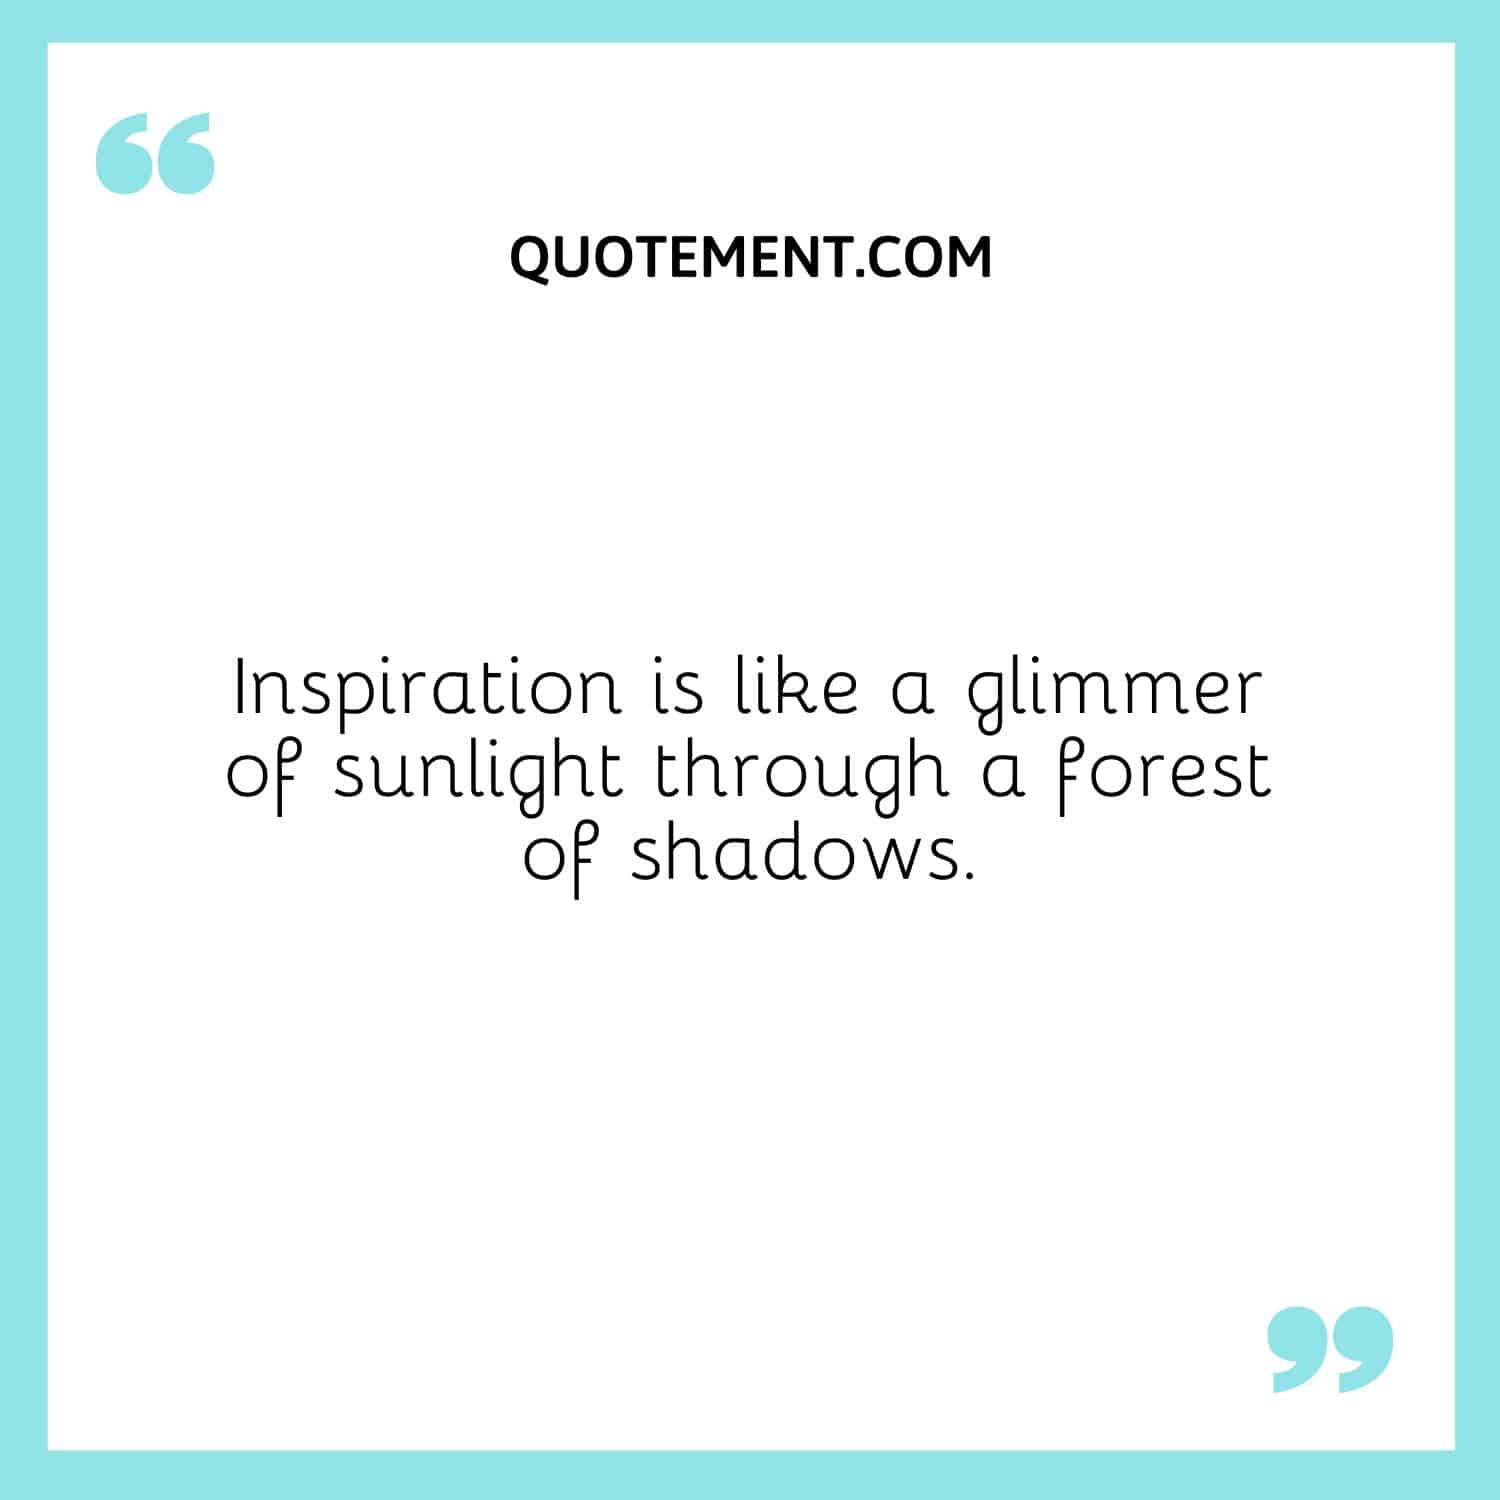 Inspiration is like a glimmer of sunlight through a forest of shadows.